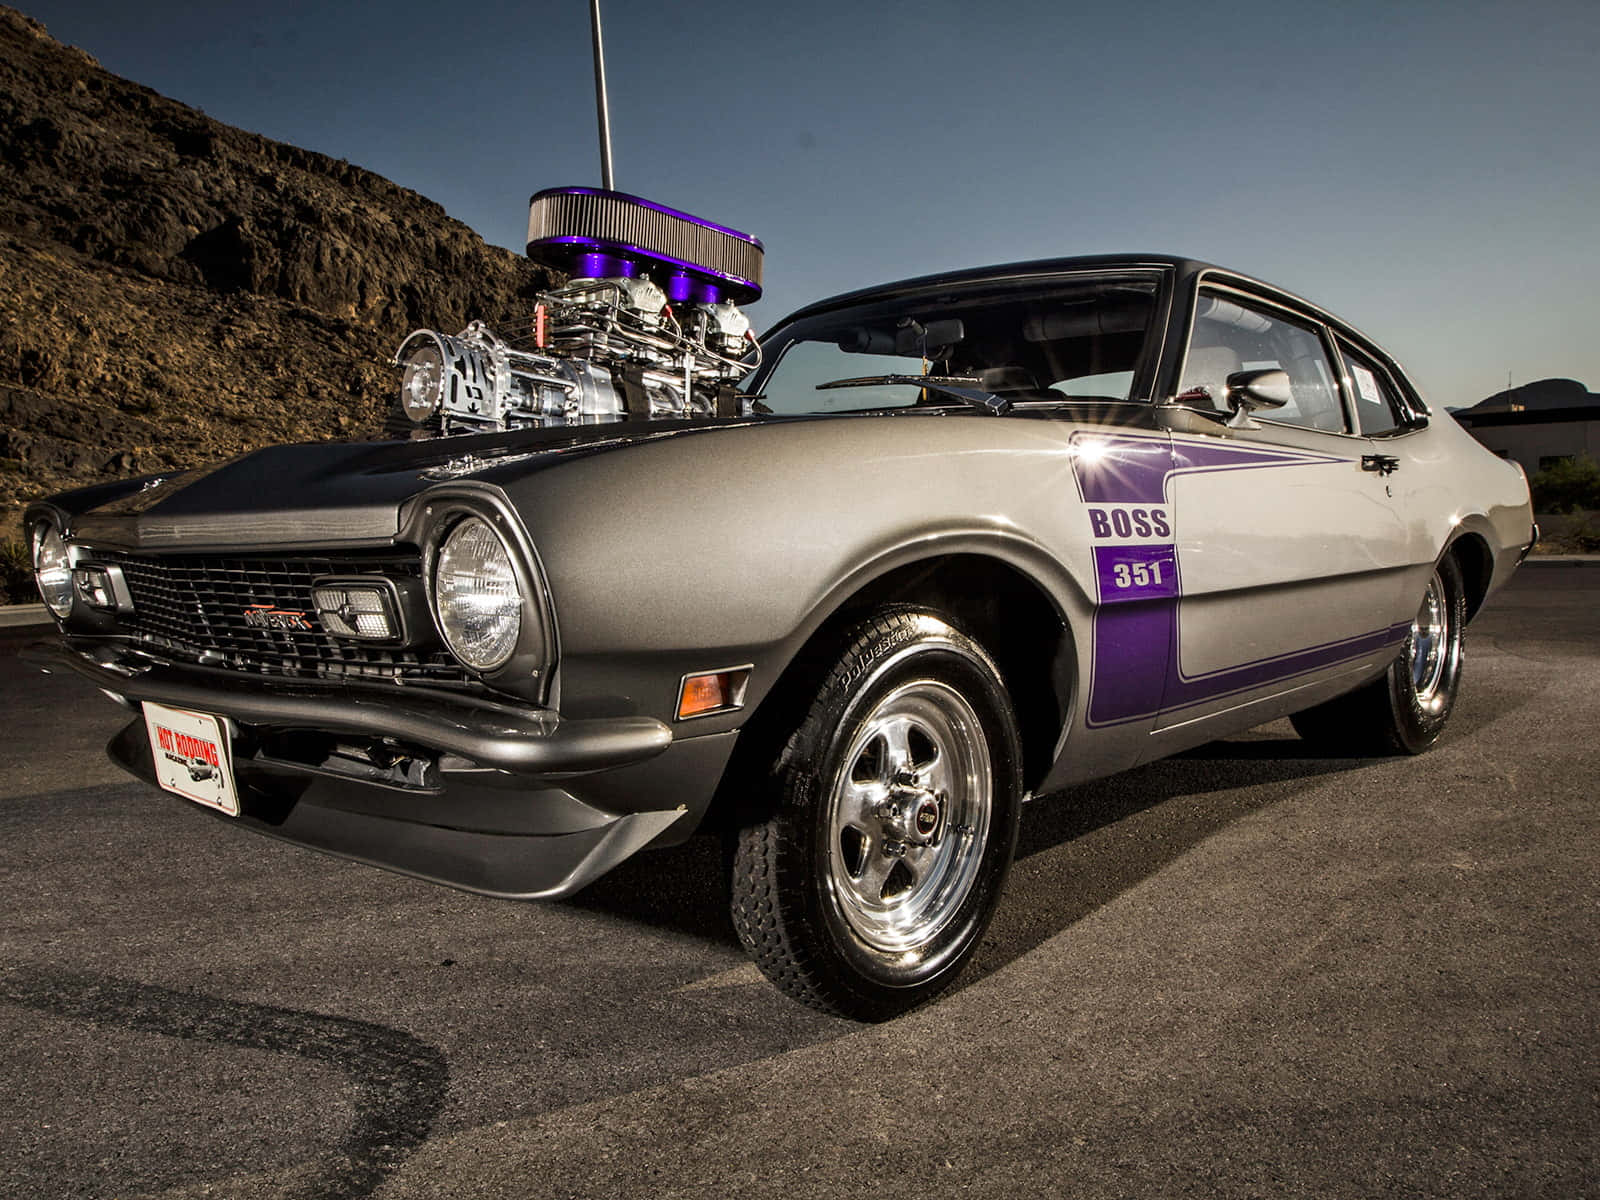 Get your hands on the Ford Maverick and make a statement